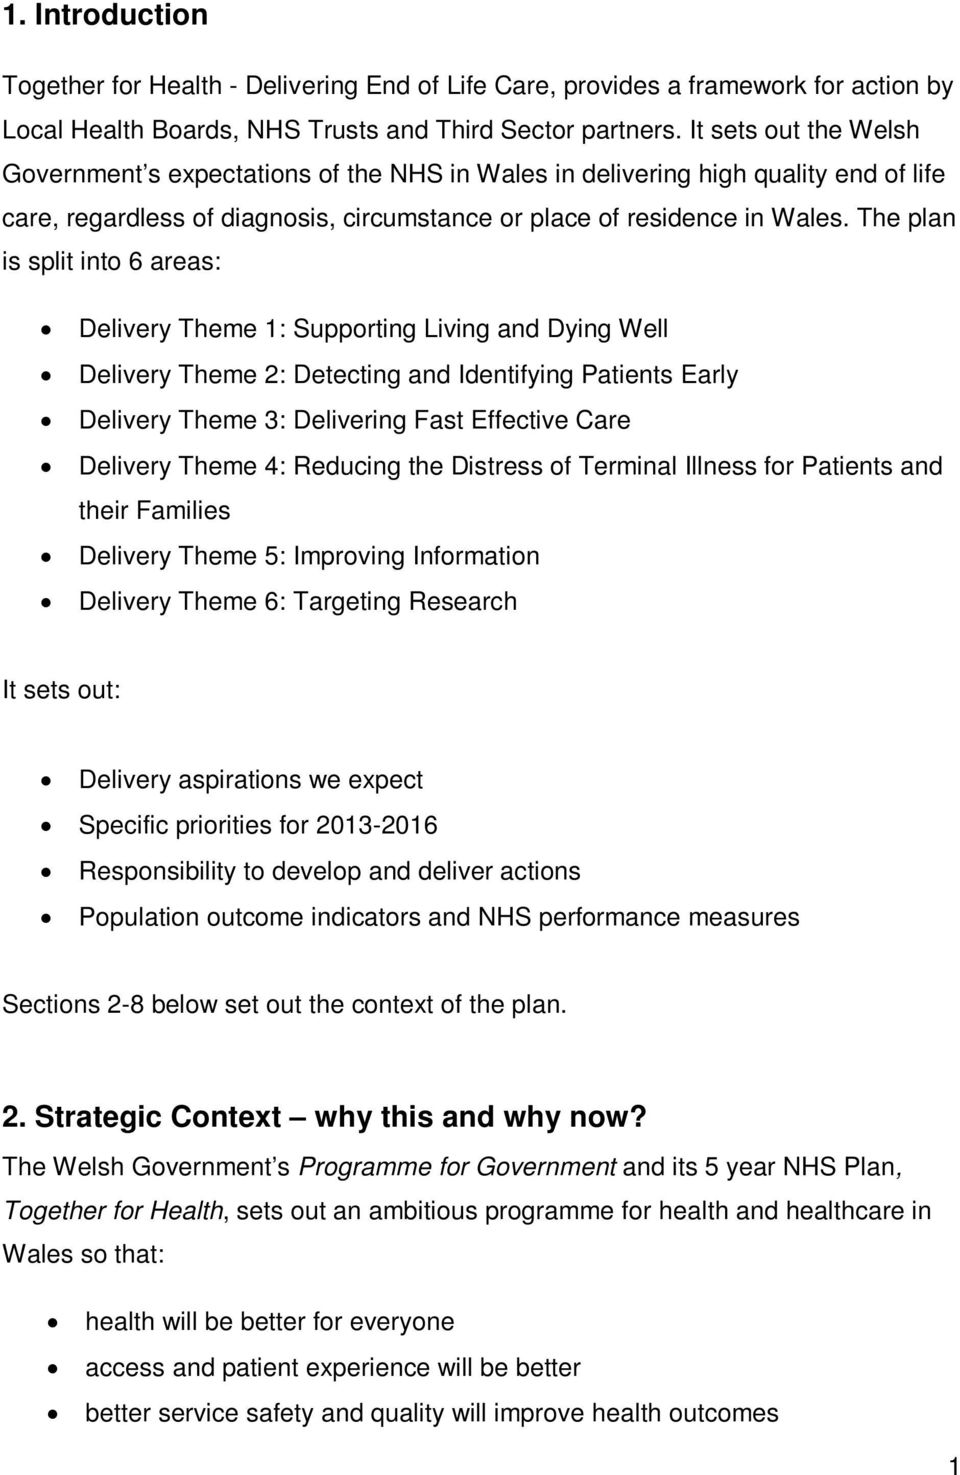 The plan is split into 6 areas: Delivery Theme 1: Supporting Living and Dying Well Delivery Theme 2: Detecting and Identifying Patients Early Delivery Theme 3: Delivering Fast Effective Care Delivery